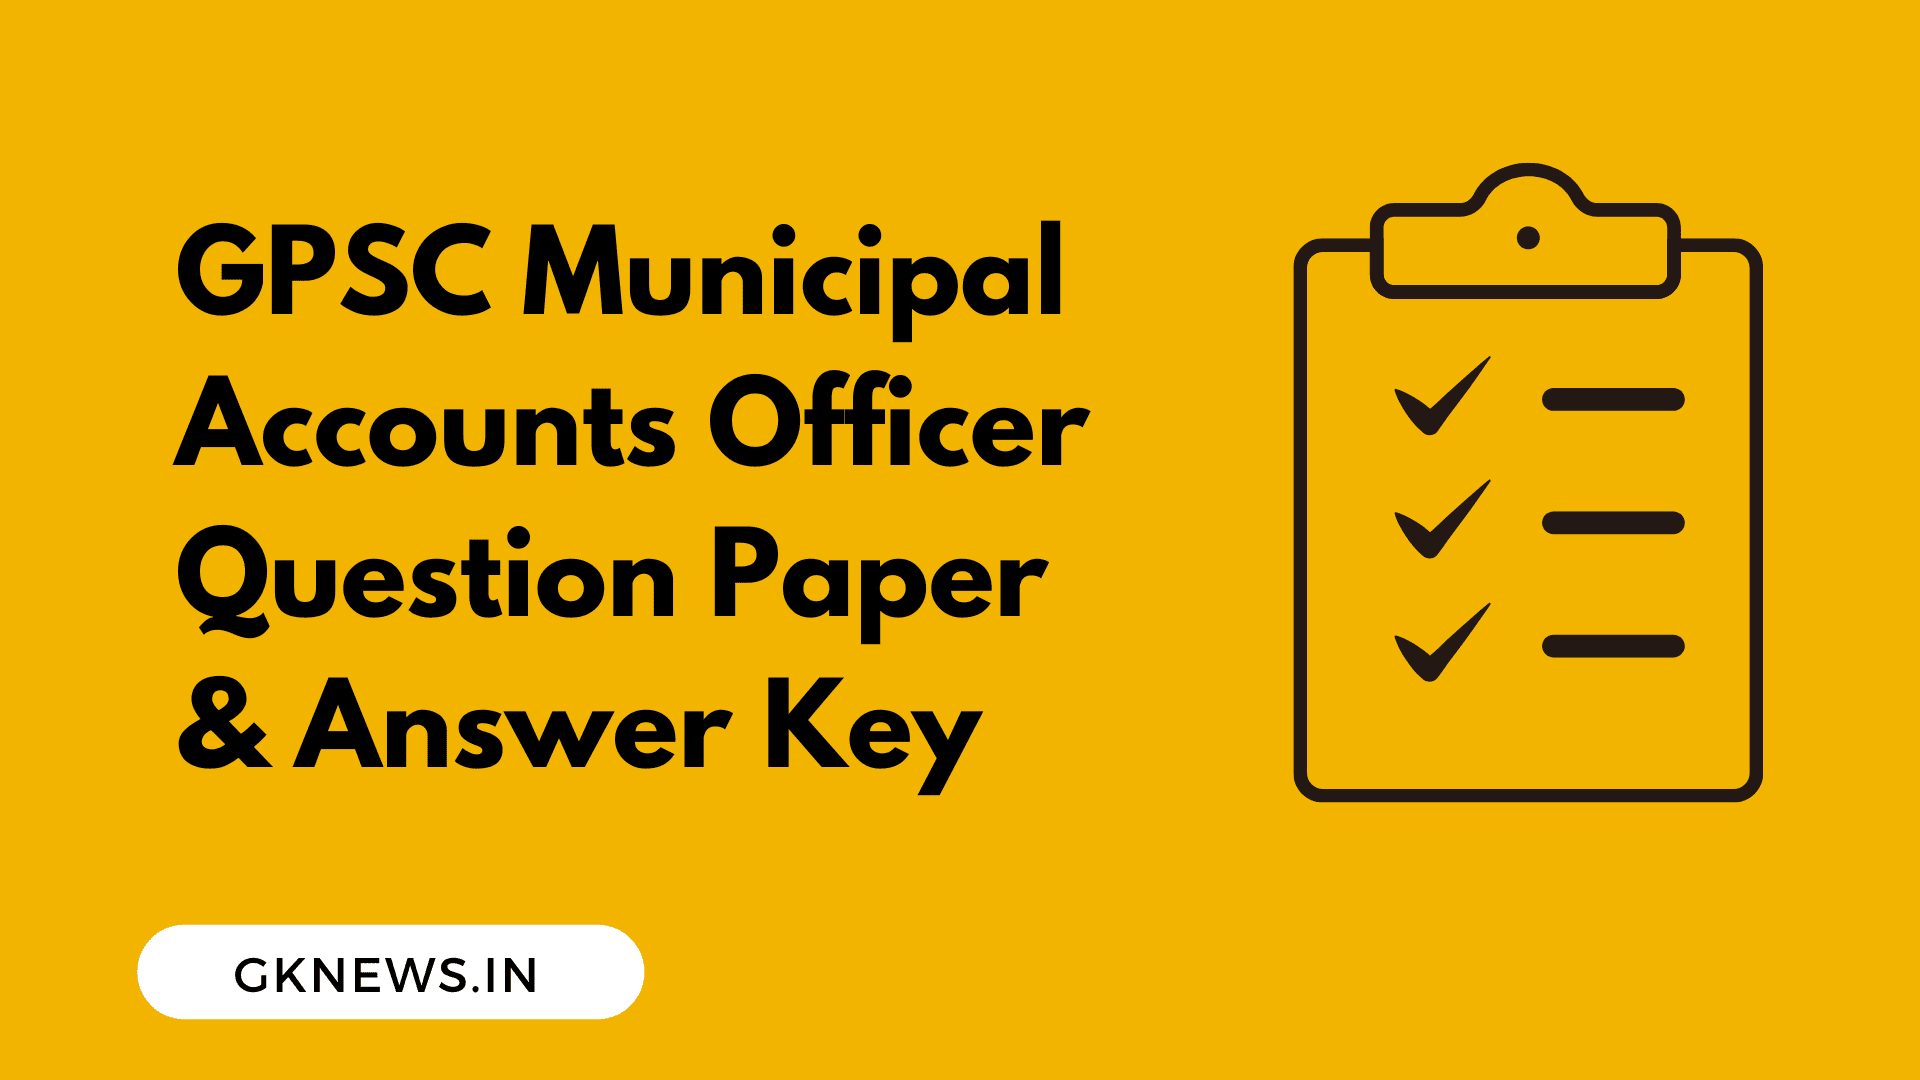 GPSC Municipal Accounts Officer Question Paper and Answer Key 2022